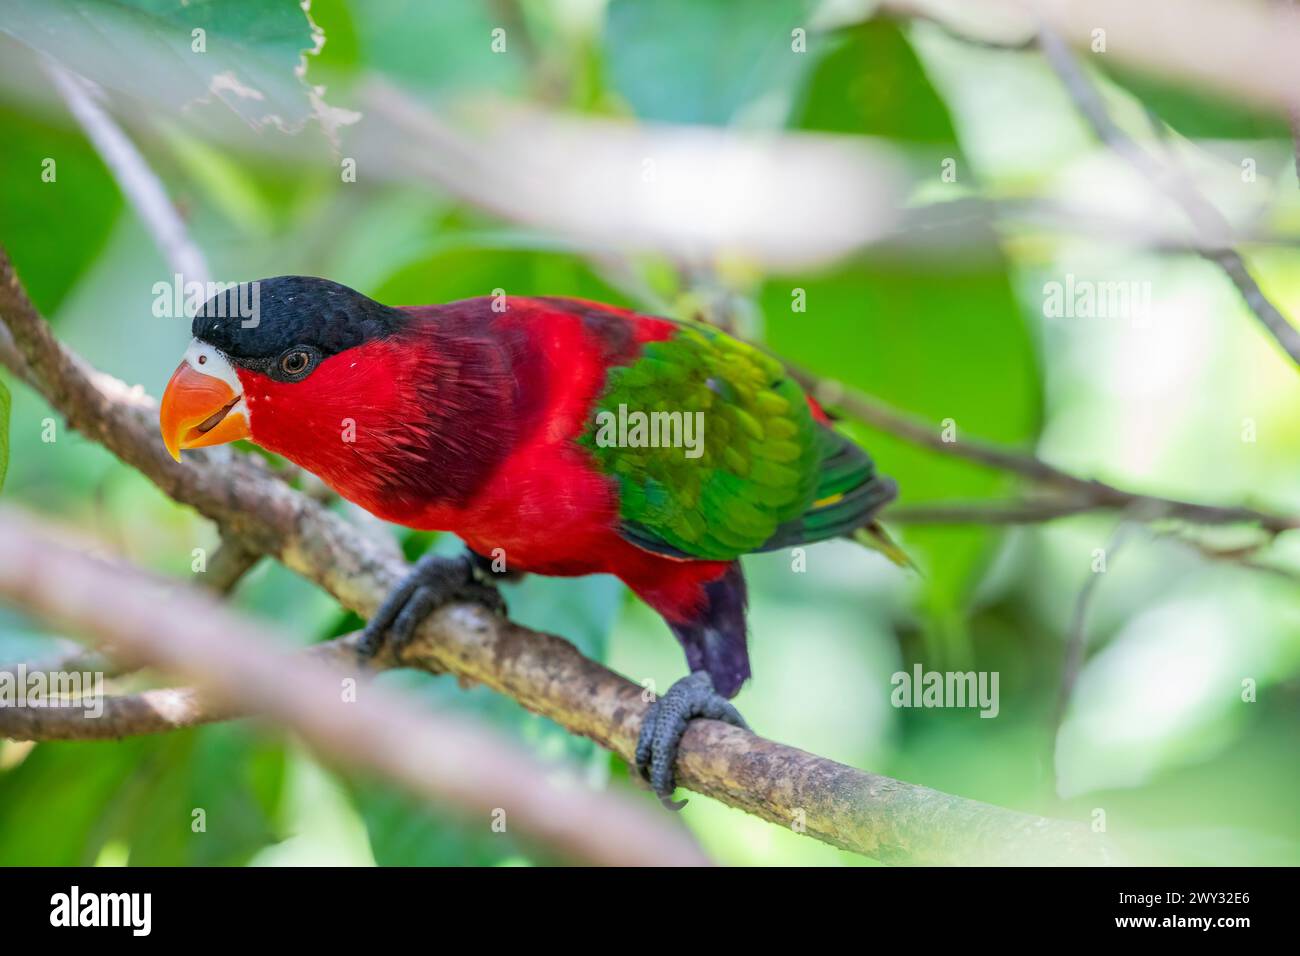 The purple-bellied lory (Lorius hypoinochrous) is a species of parrot in the family Psittaculidae. It is endemic to Papua New Guinea. Stock Photo